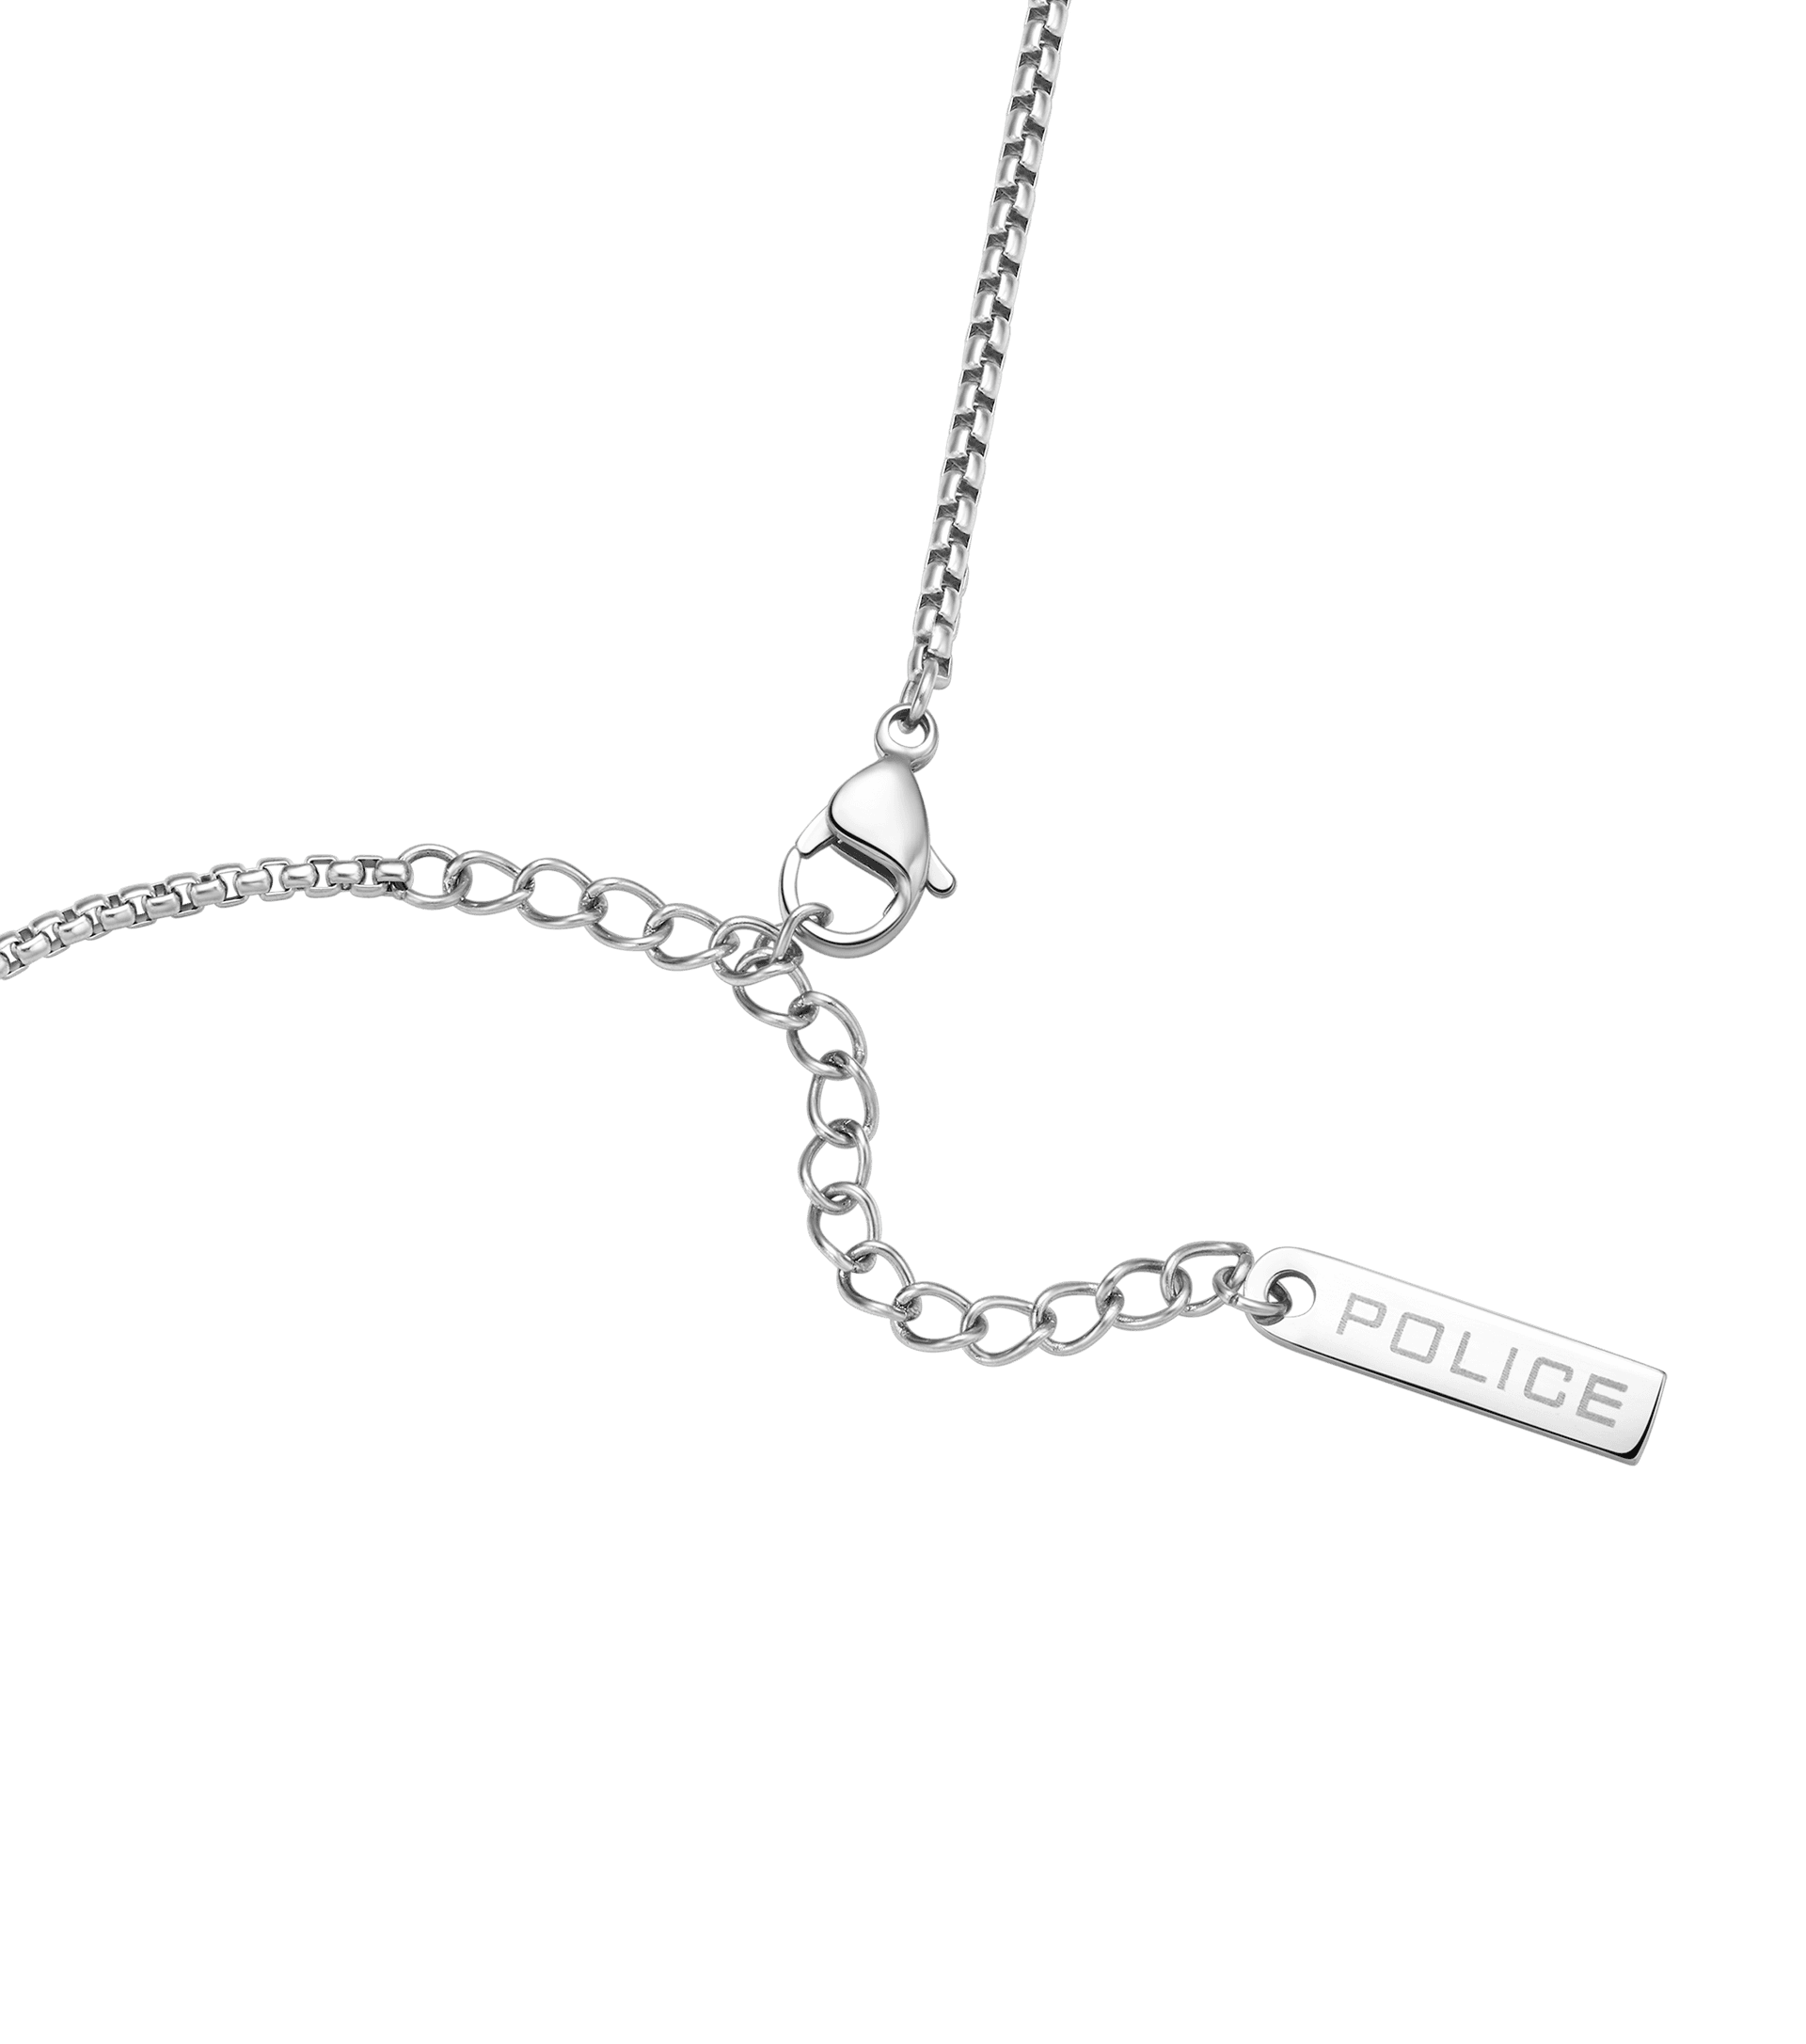 Police jewels - Affix Necklace By Police For Men PEAGN0004906